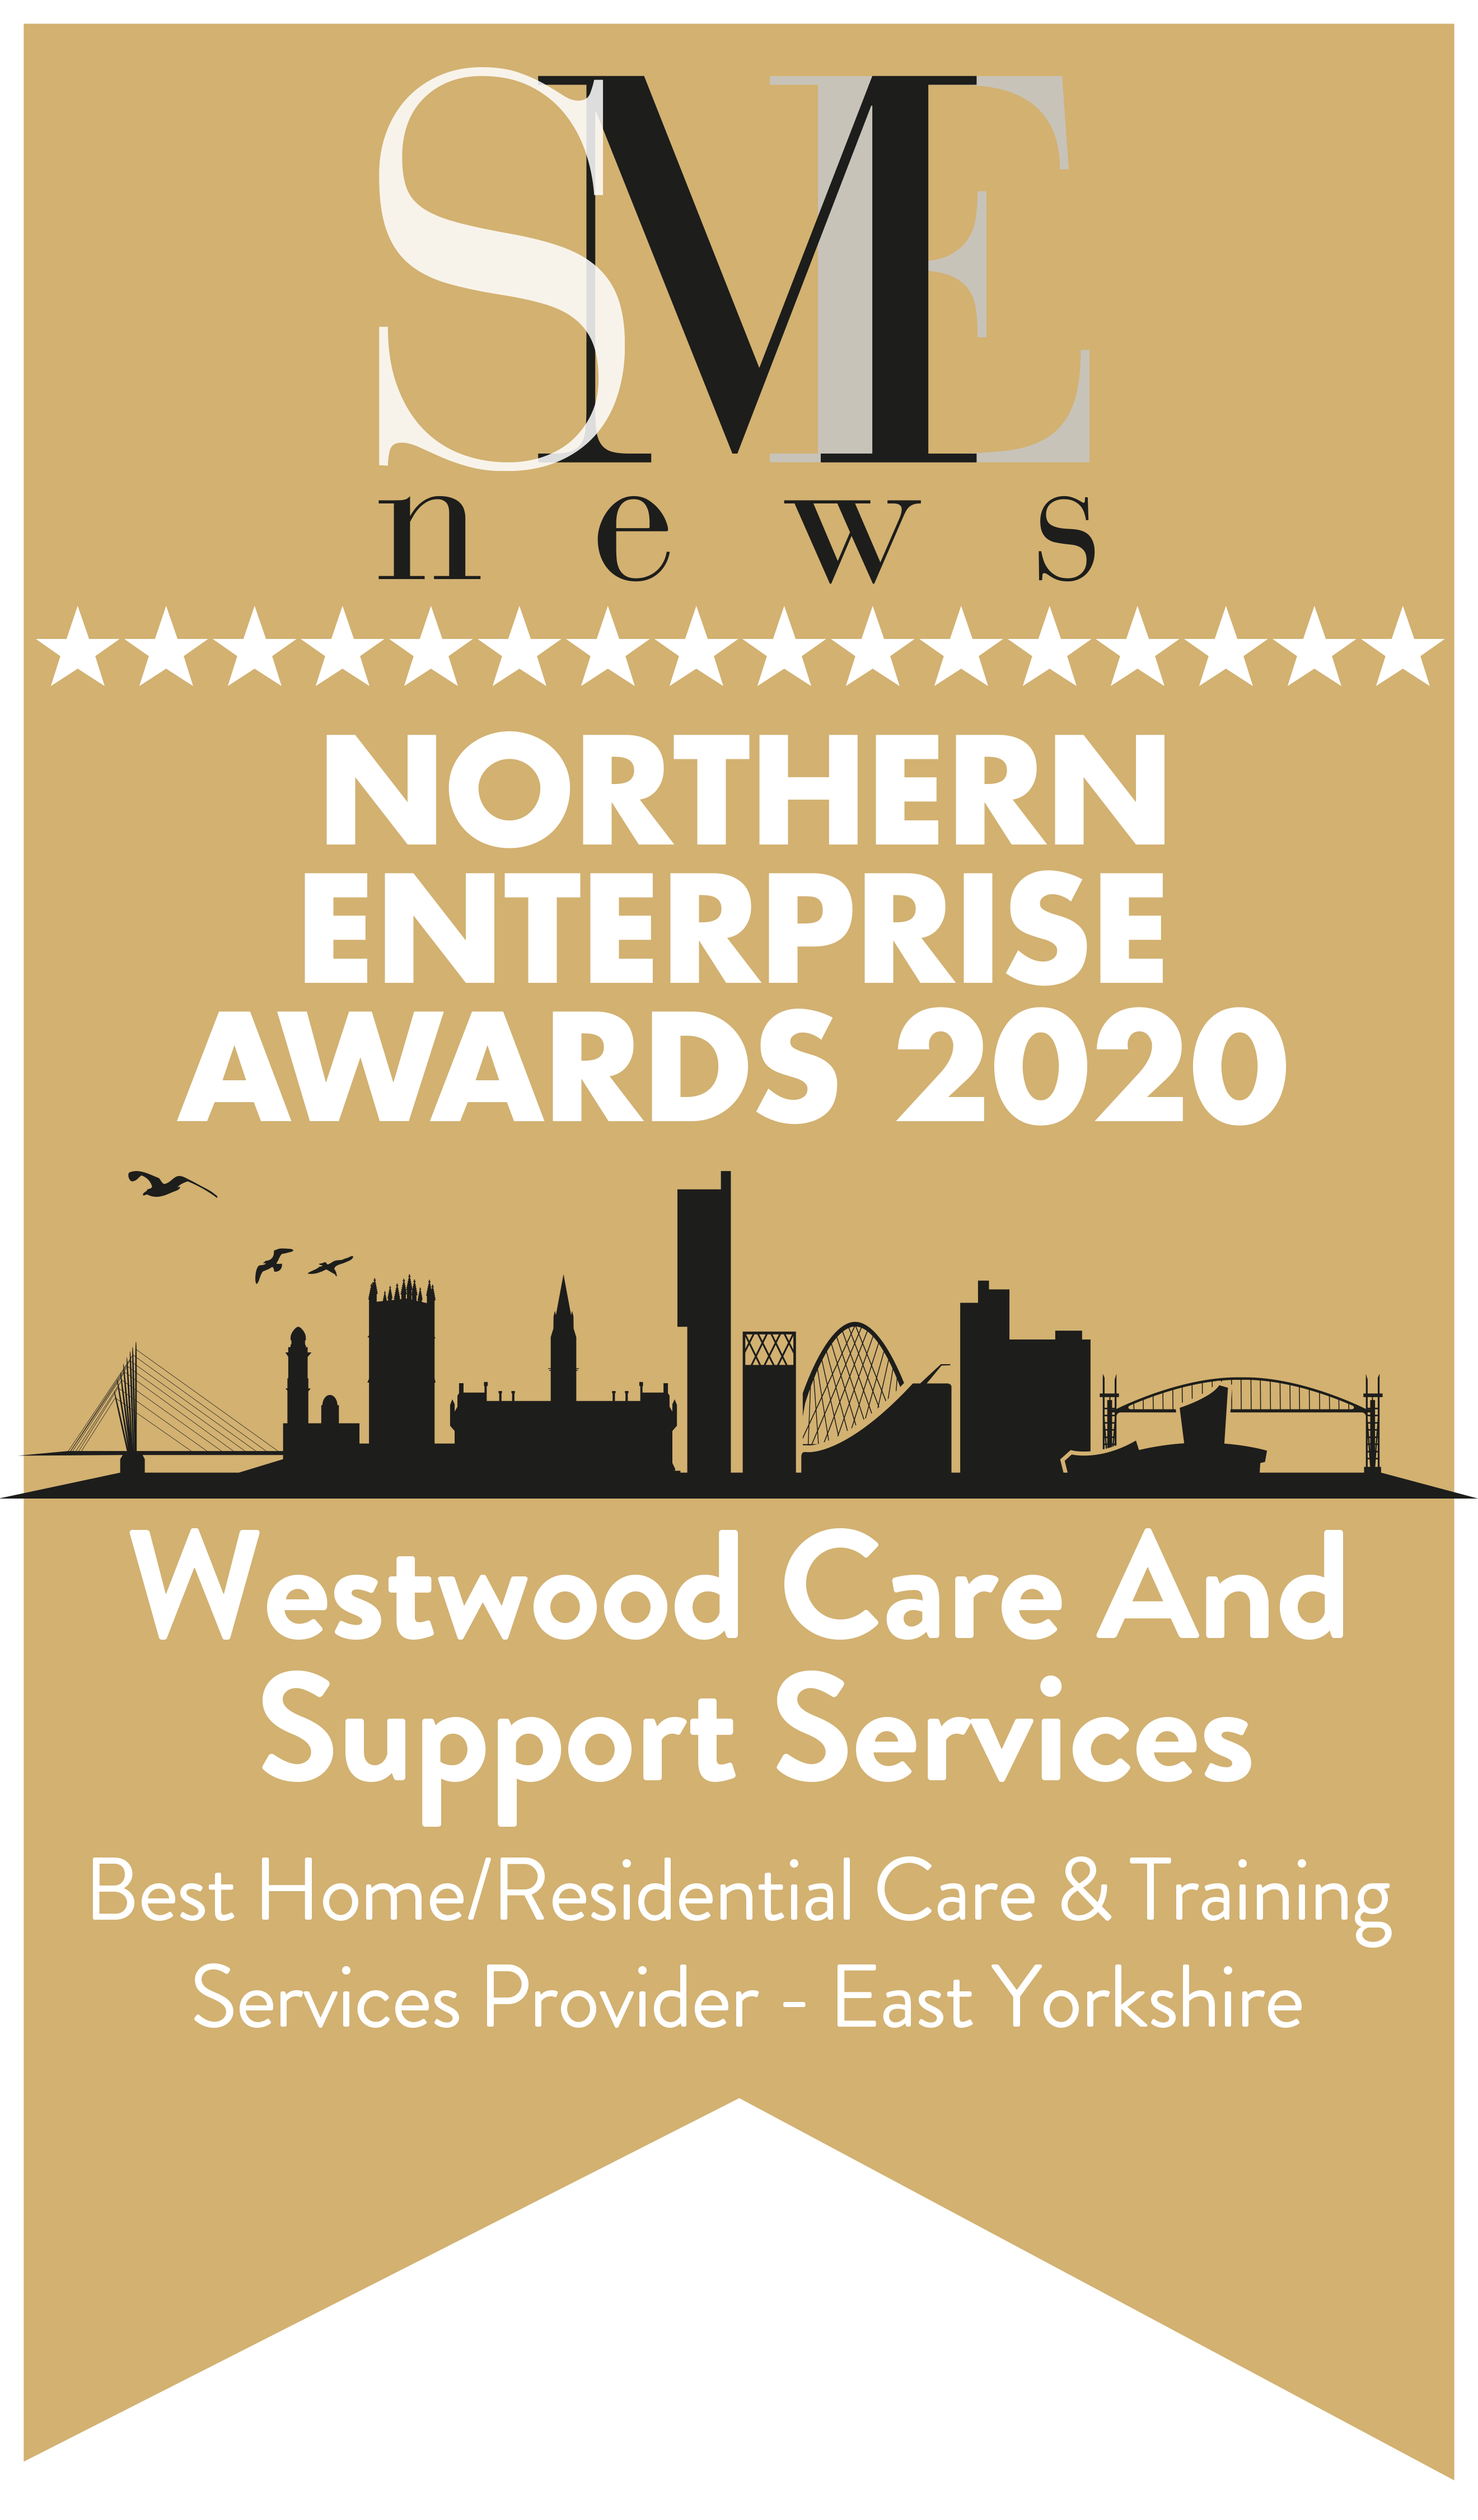 Westwood Care Group